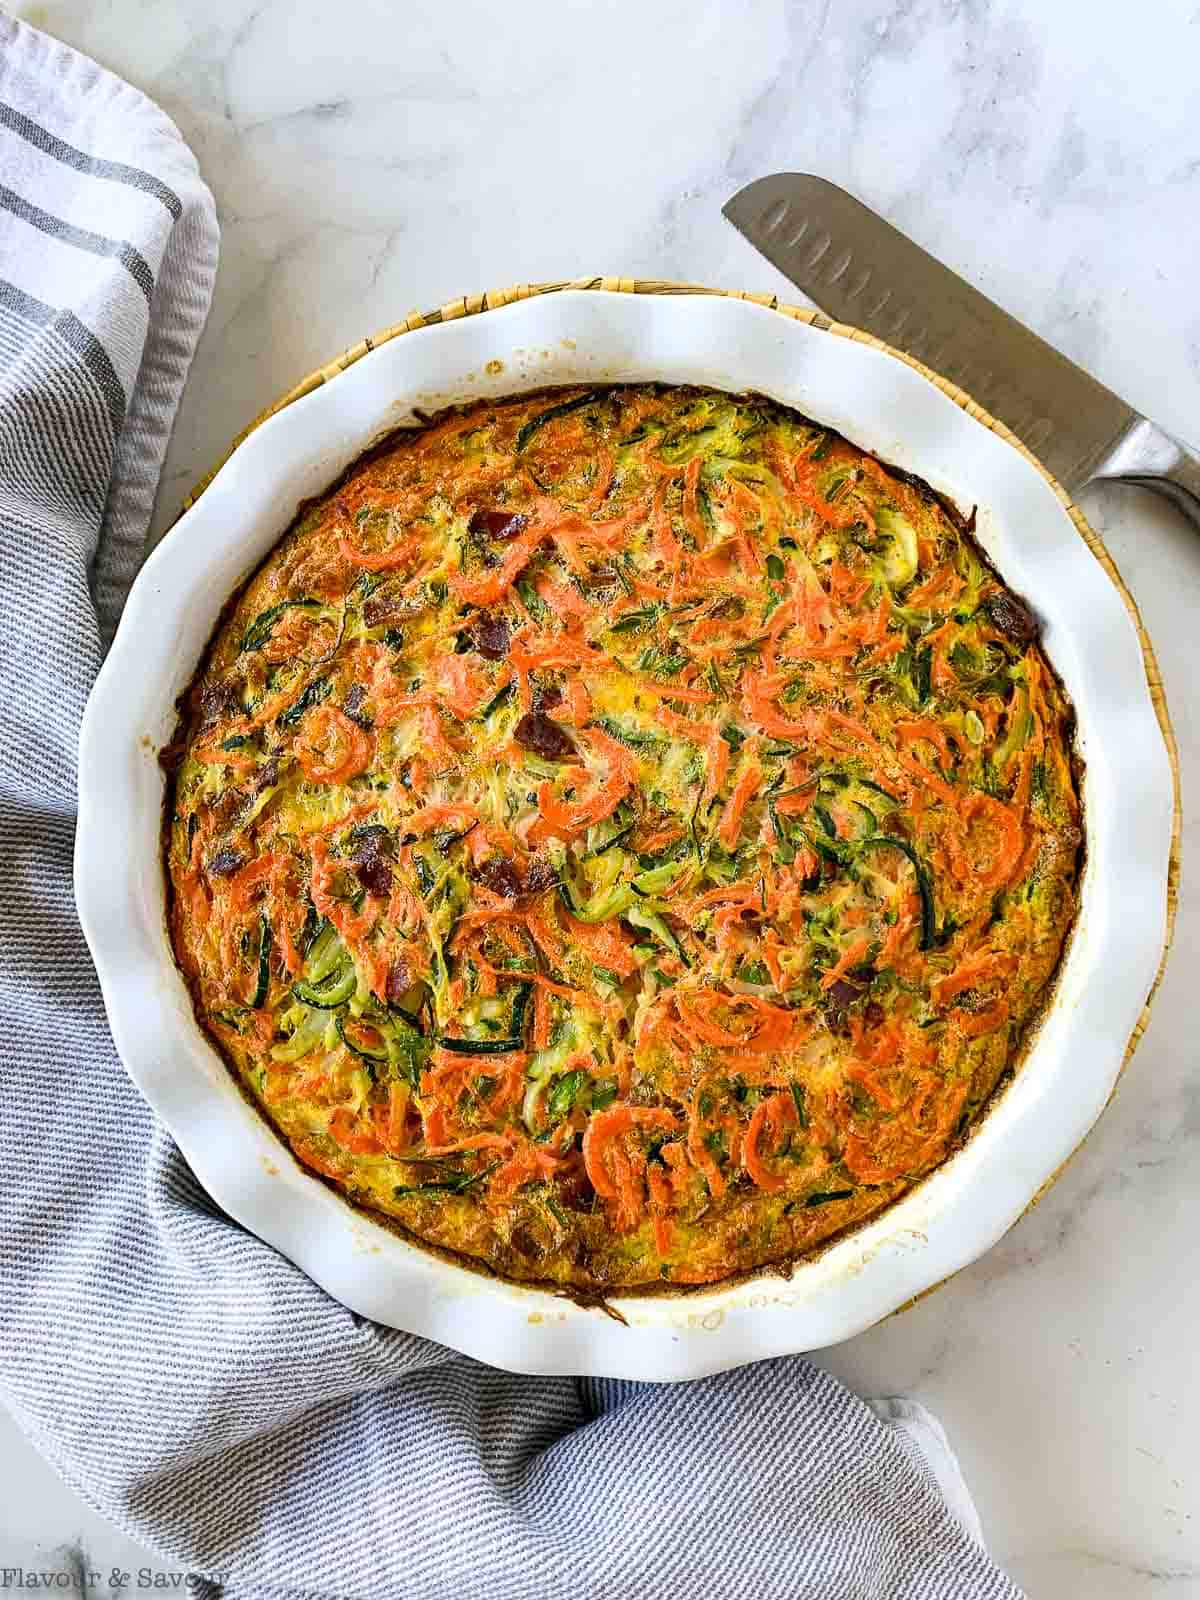 A baked zucchini carrot quiche.